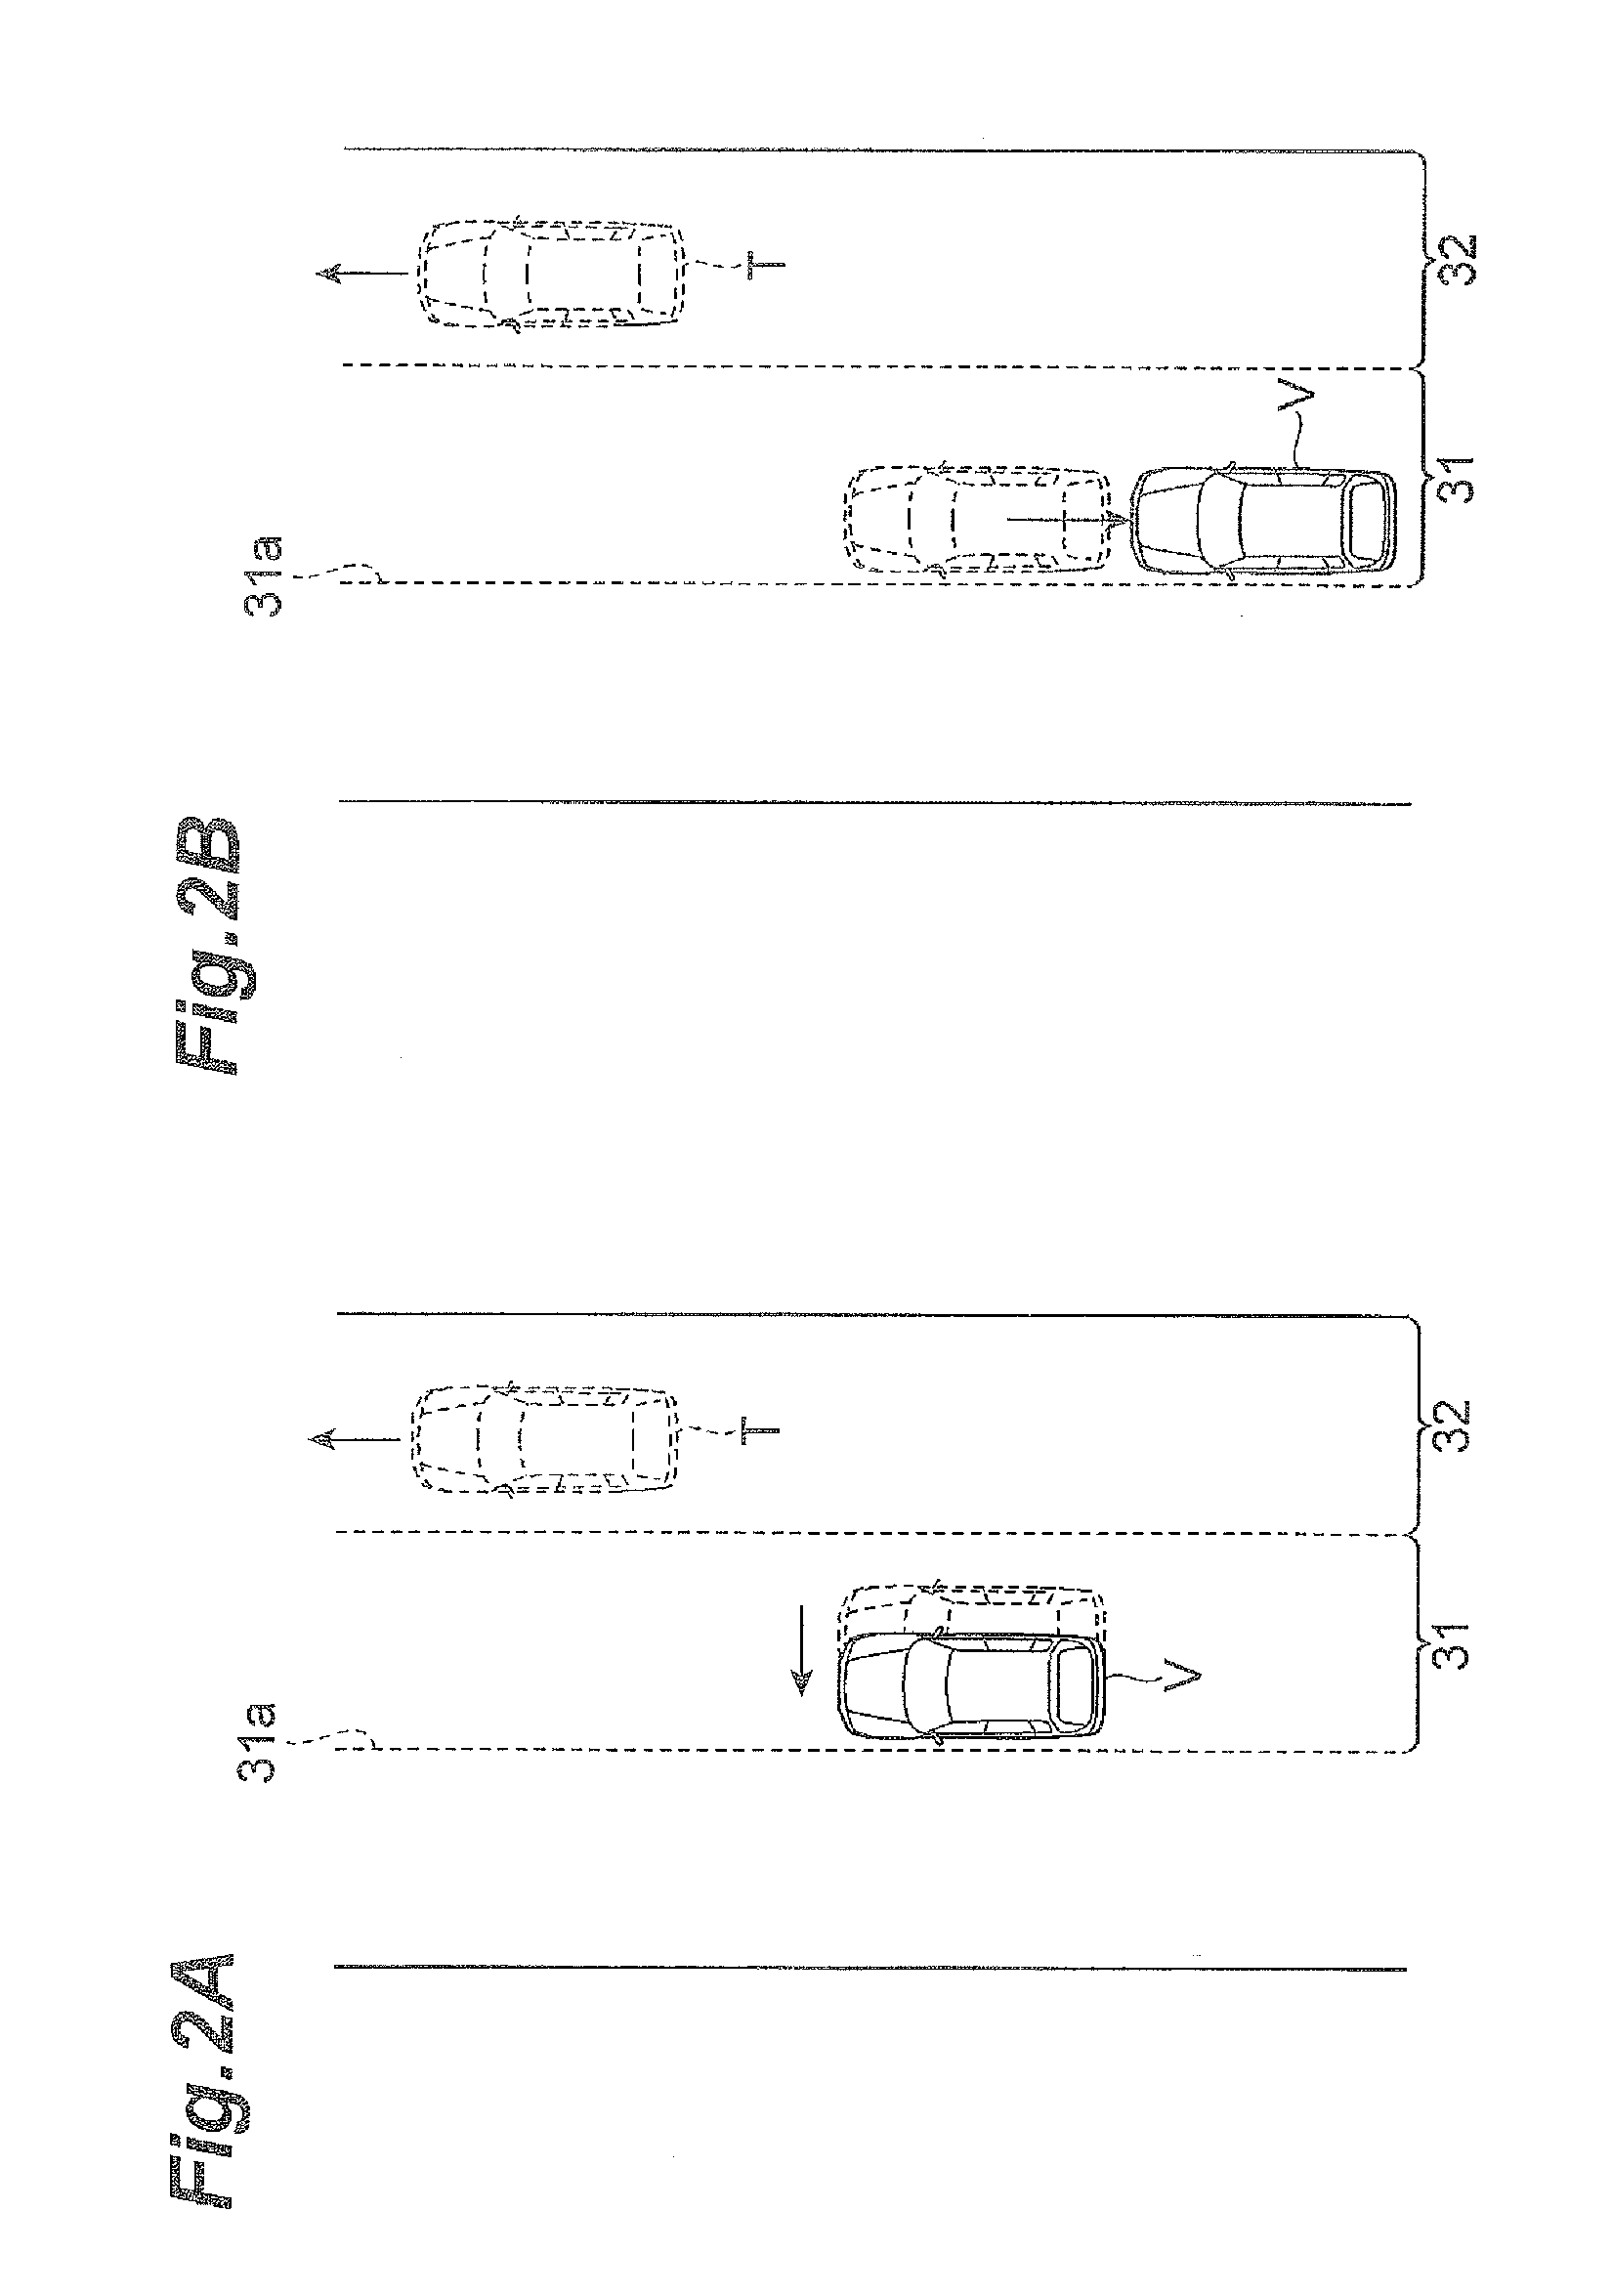 Vehicle travelling control device